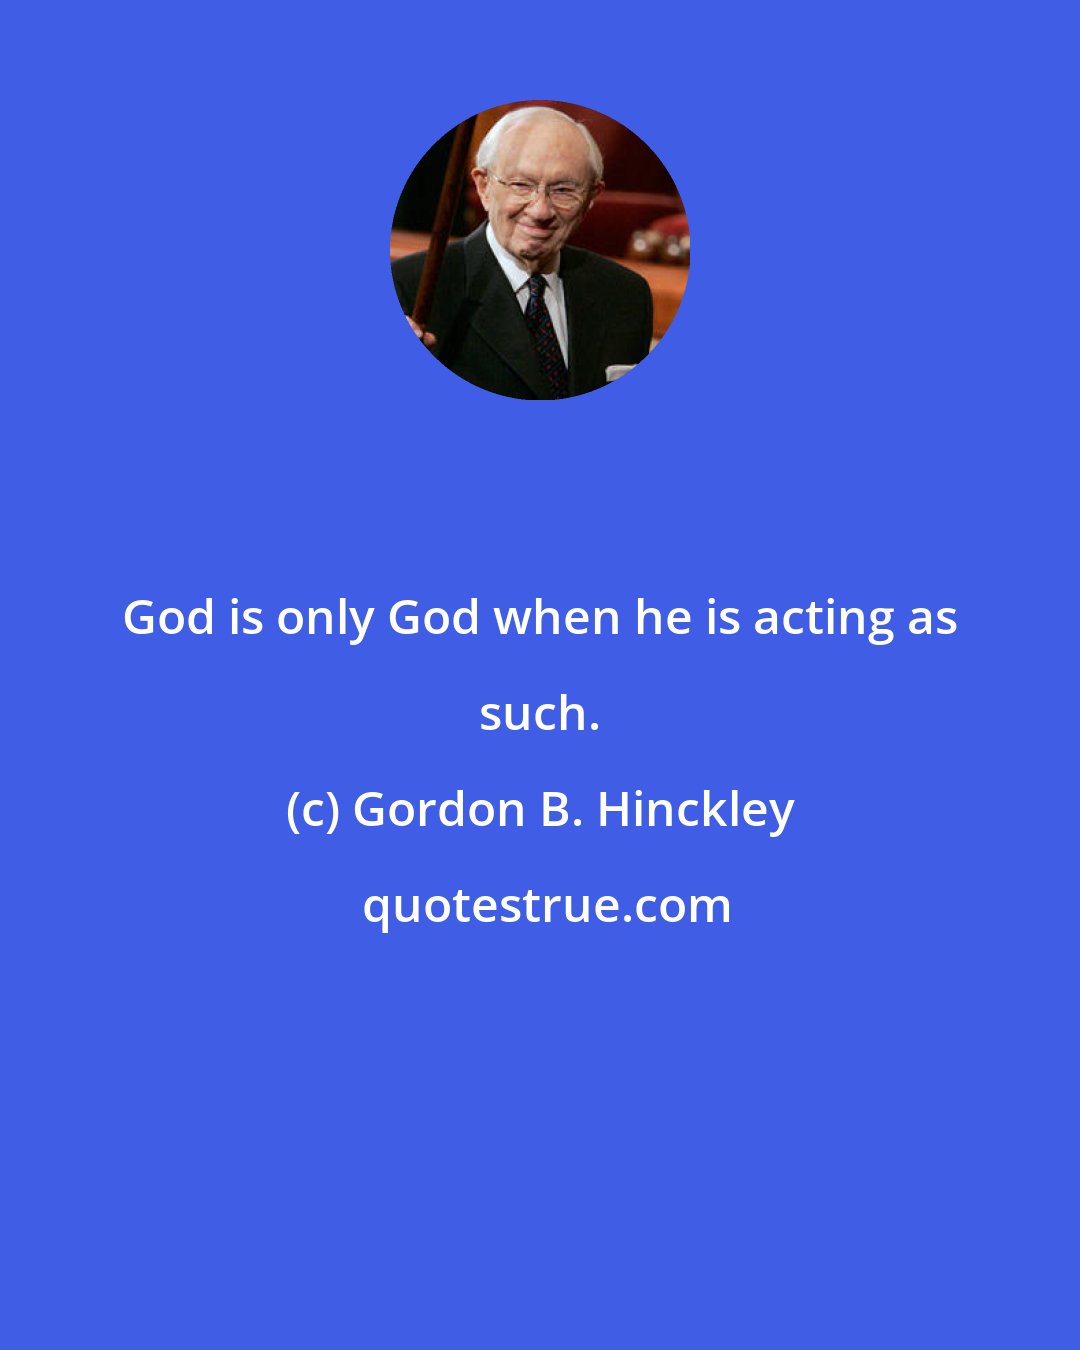 Gordon B. Hinckley: God is only God when he is acting as such.